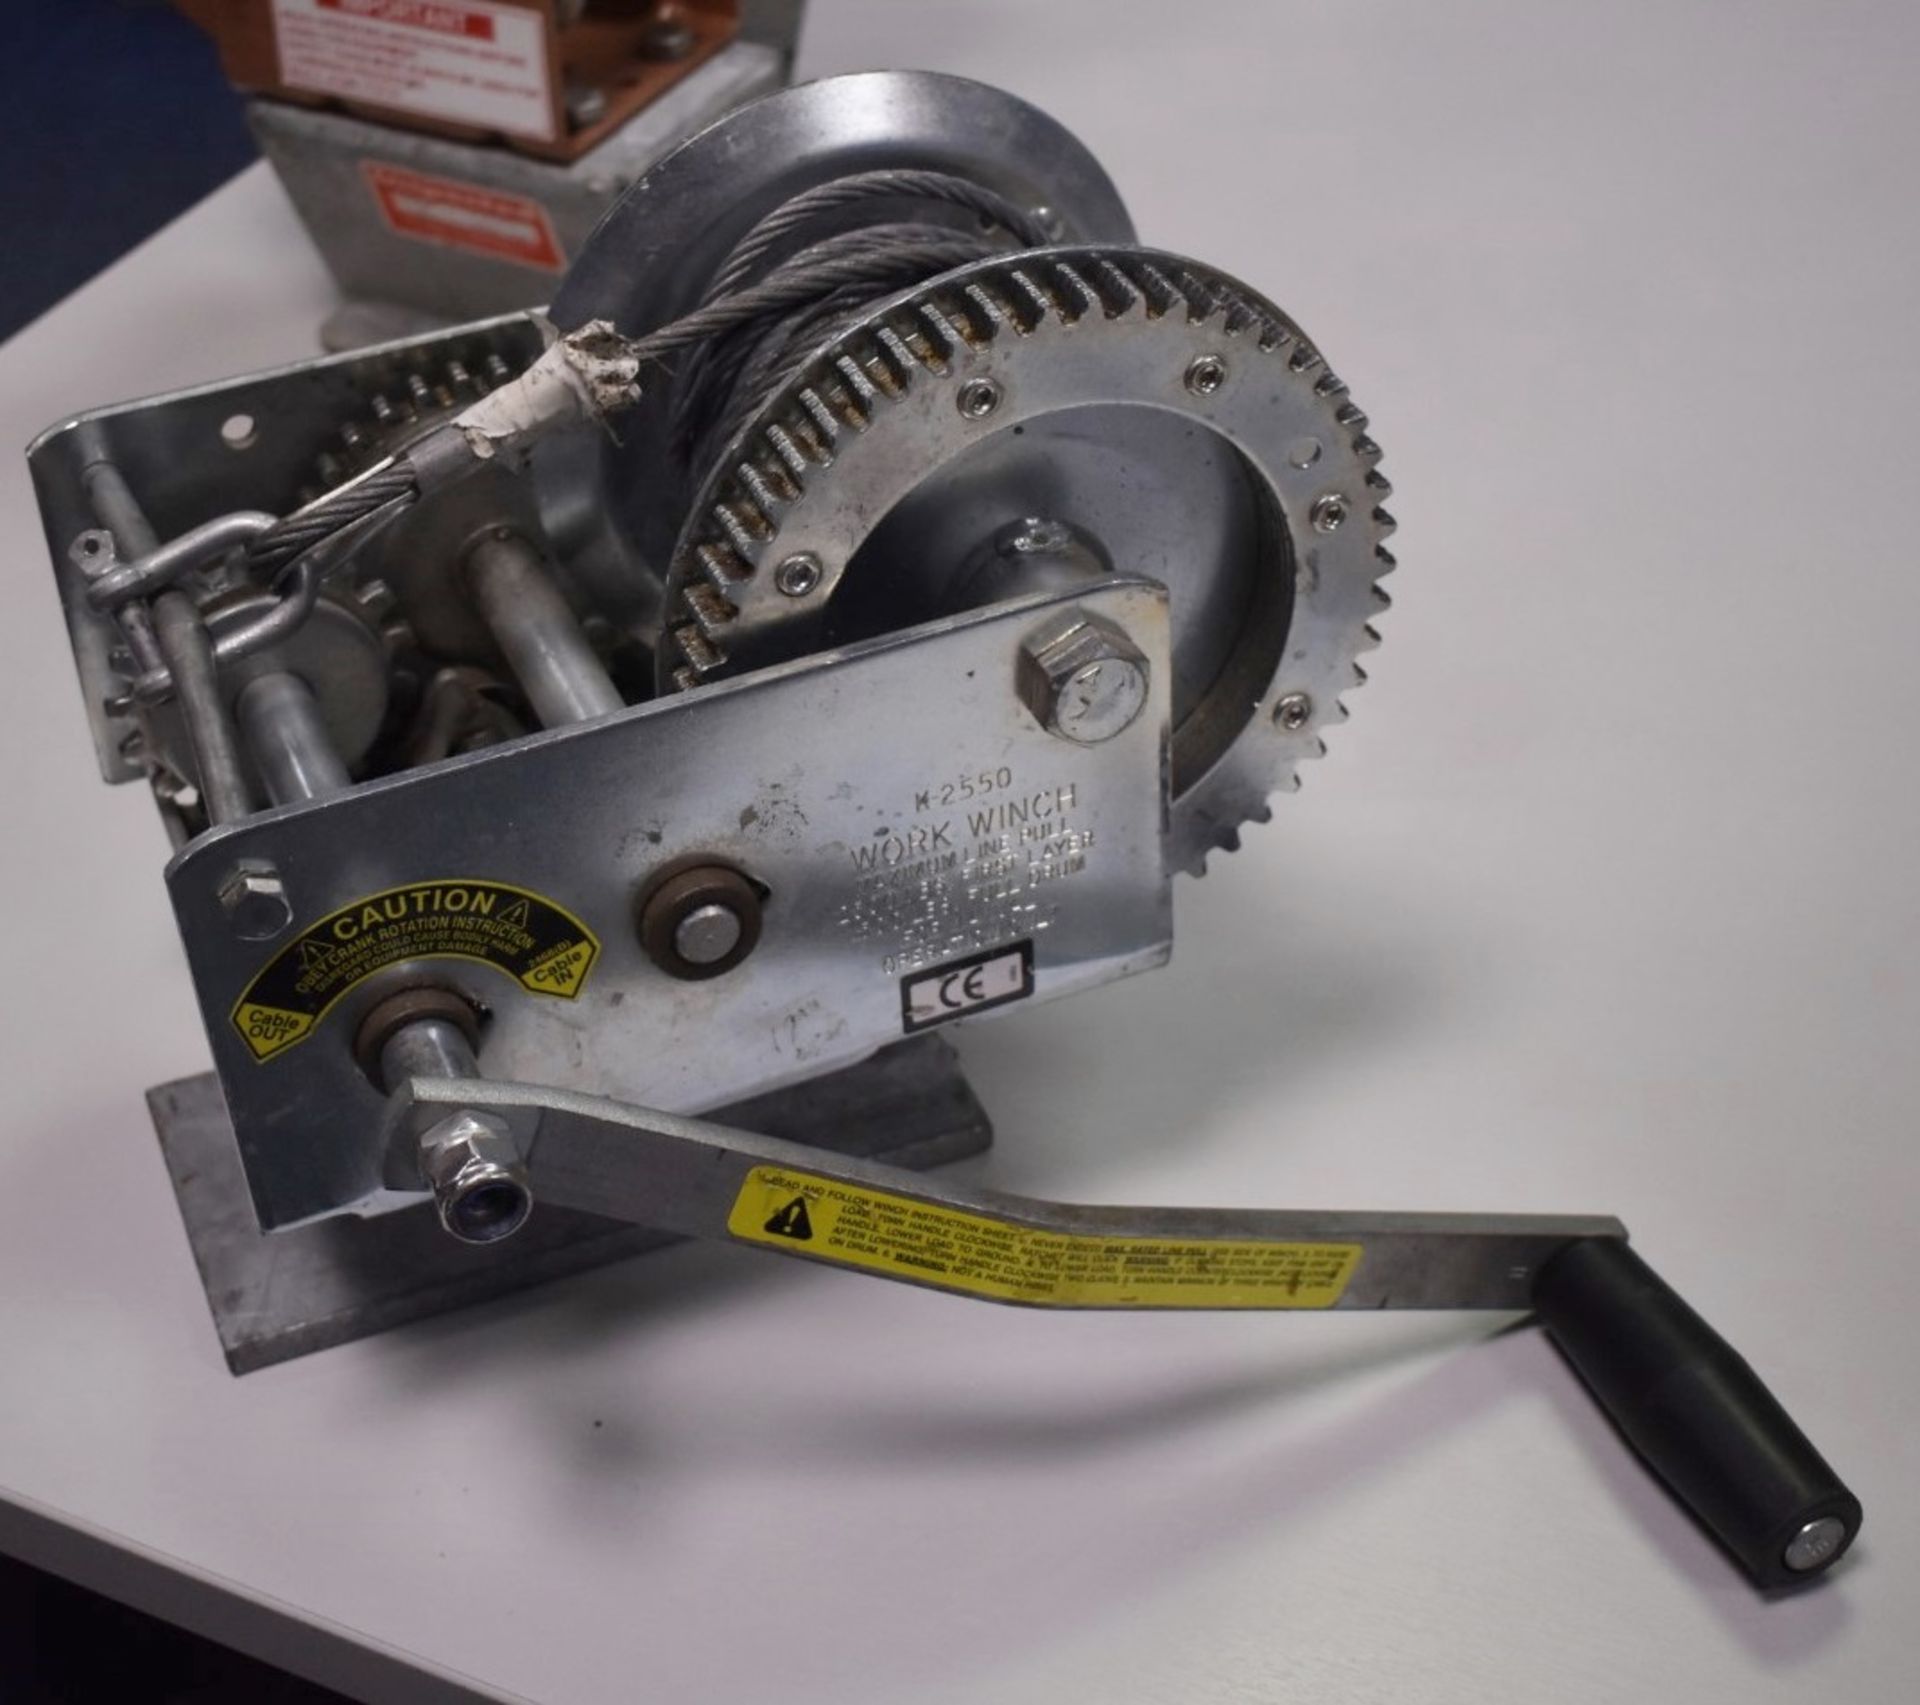 1 x K-2550 Work Winch - Ref FE232 ODS - CL480 - Location: Nottingham NG15 - Image 4 of 6